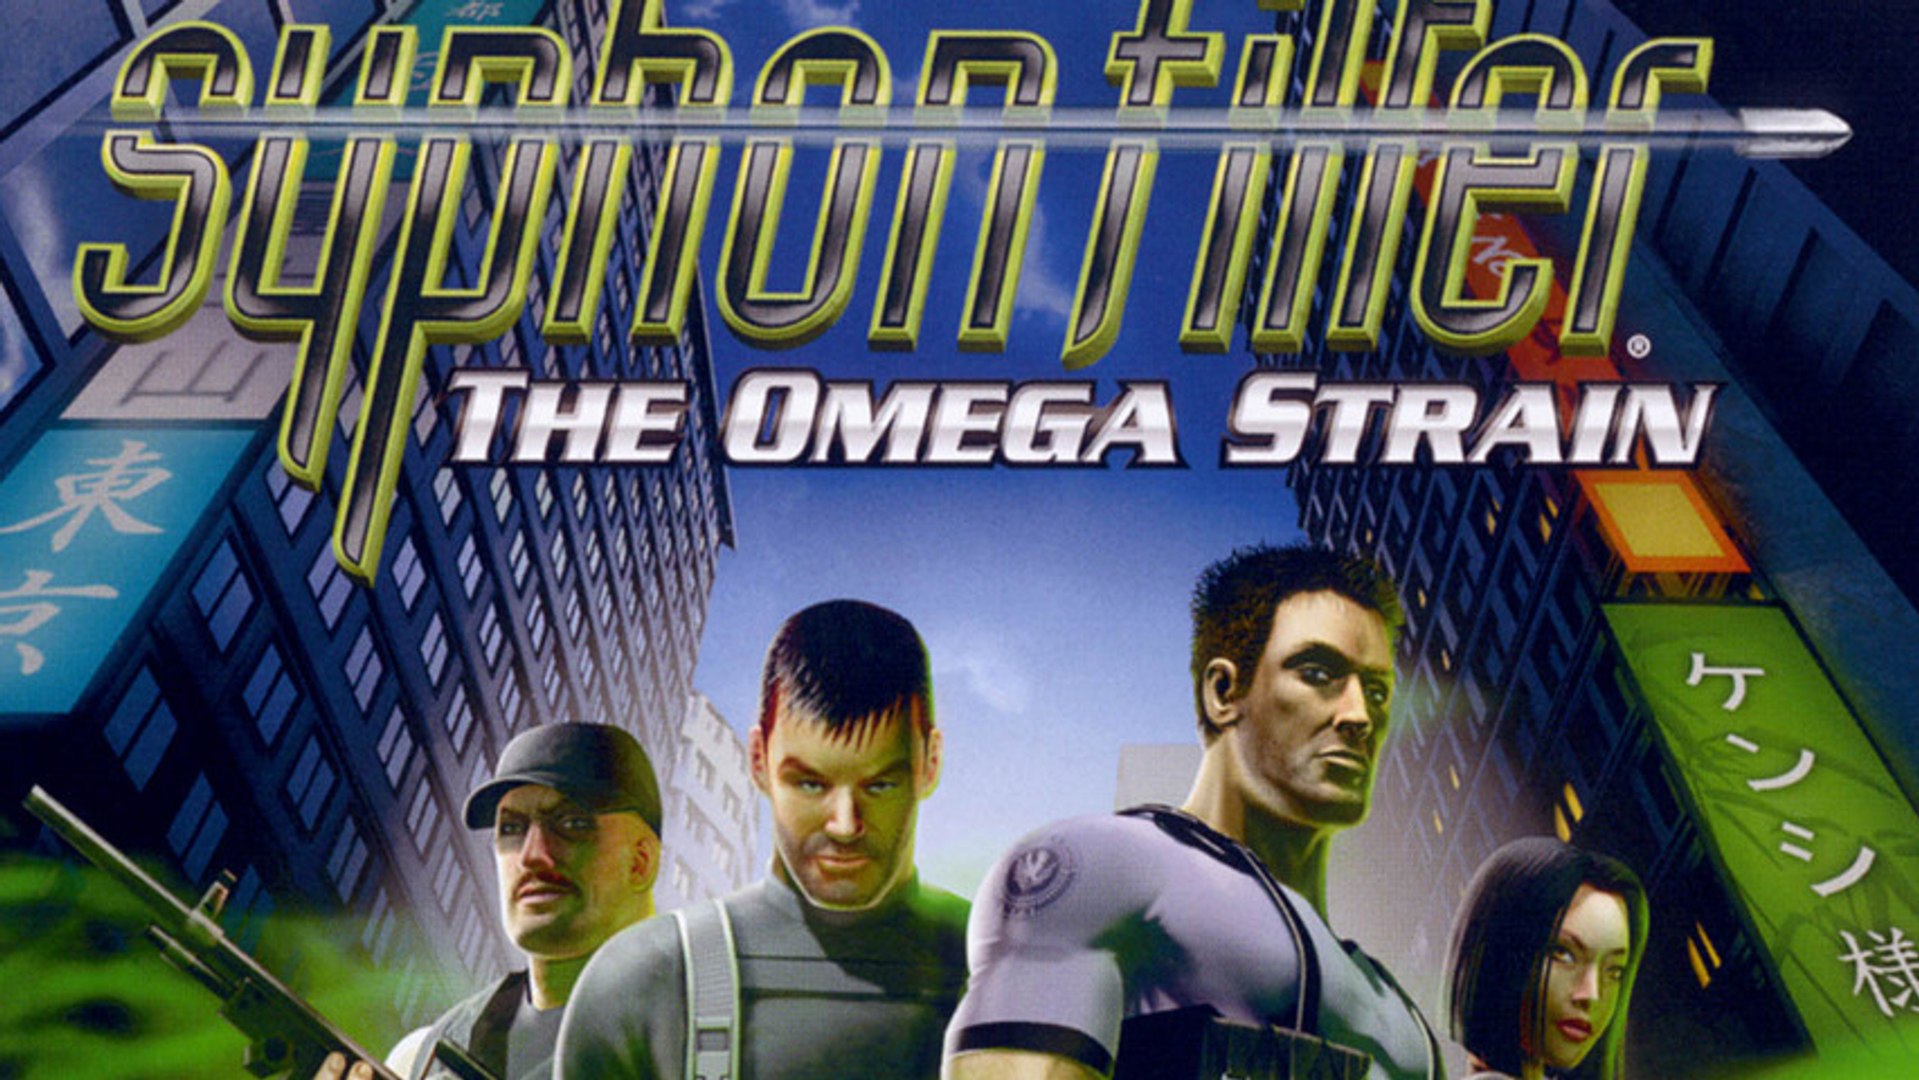 Buy Syphon Filter: The Omega Strain for PS2